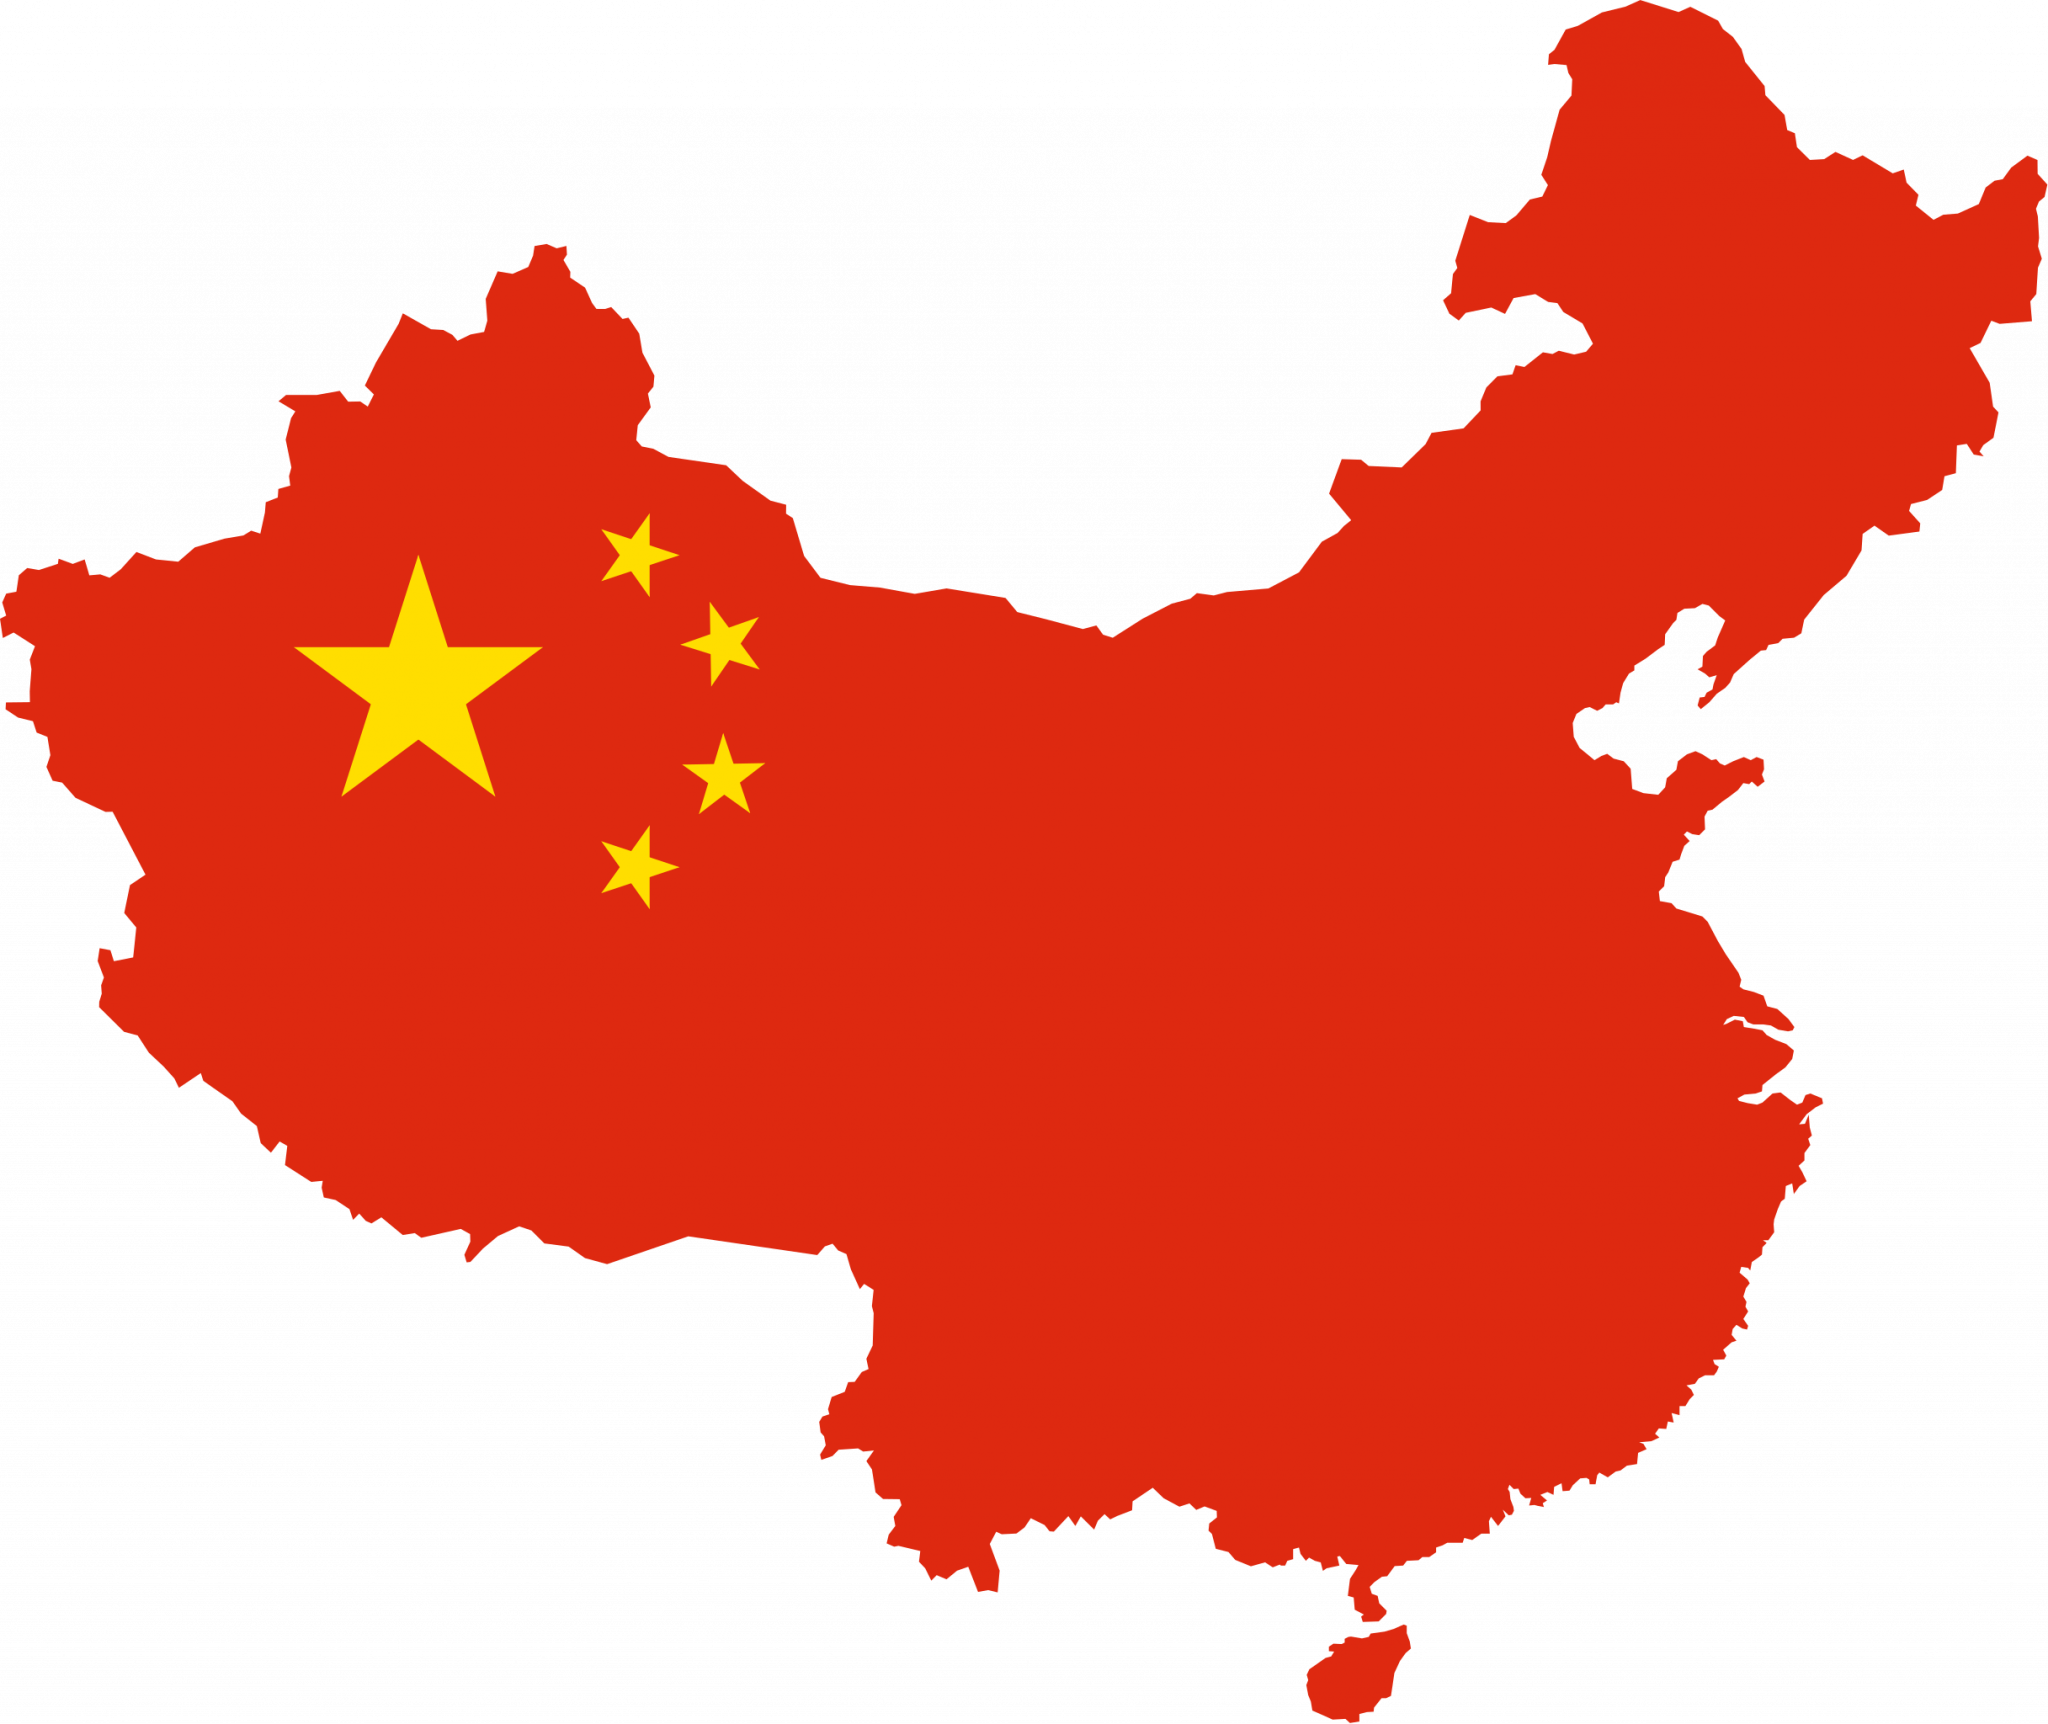 Flagmap_of_the_People's_Republic_of_China.svg Alt Enviro Tech